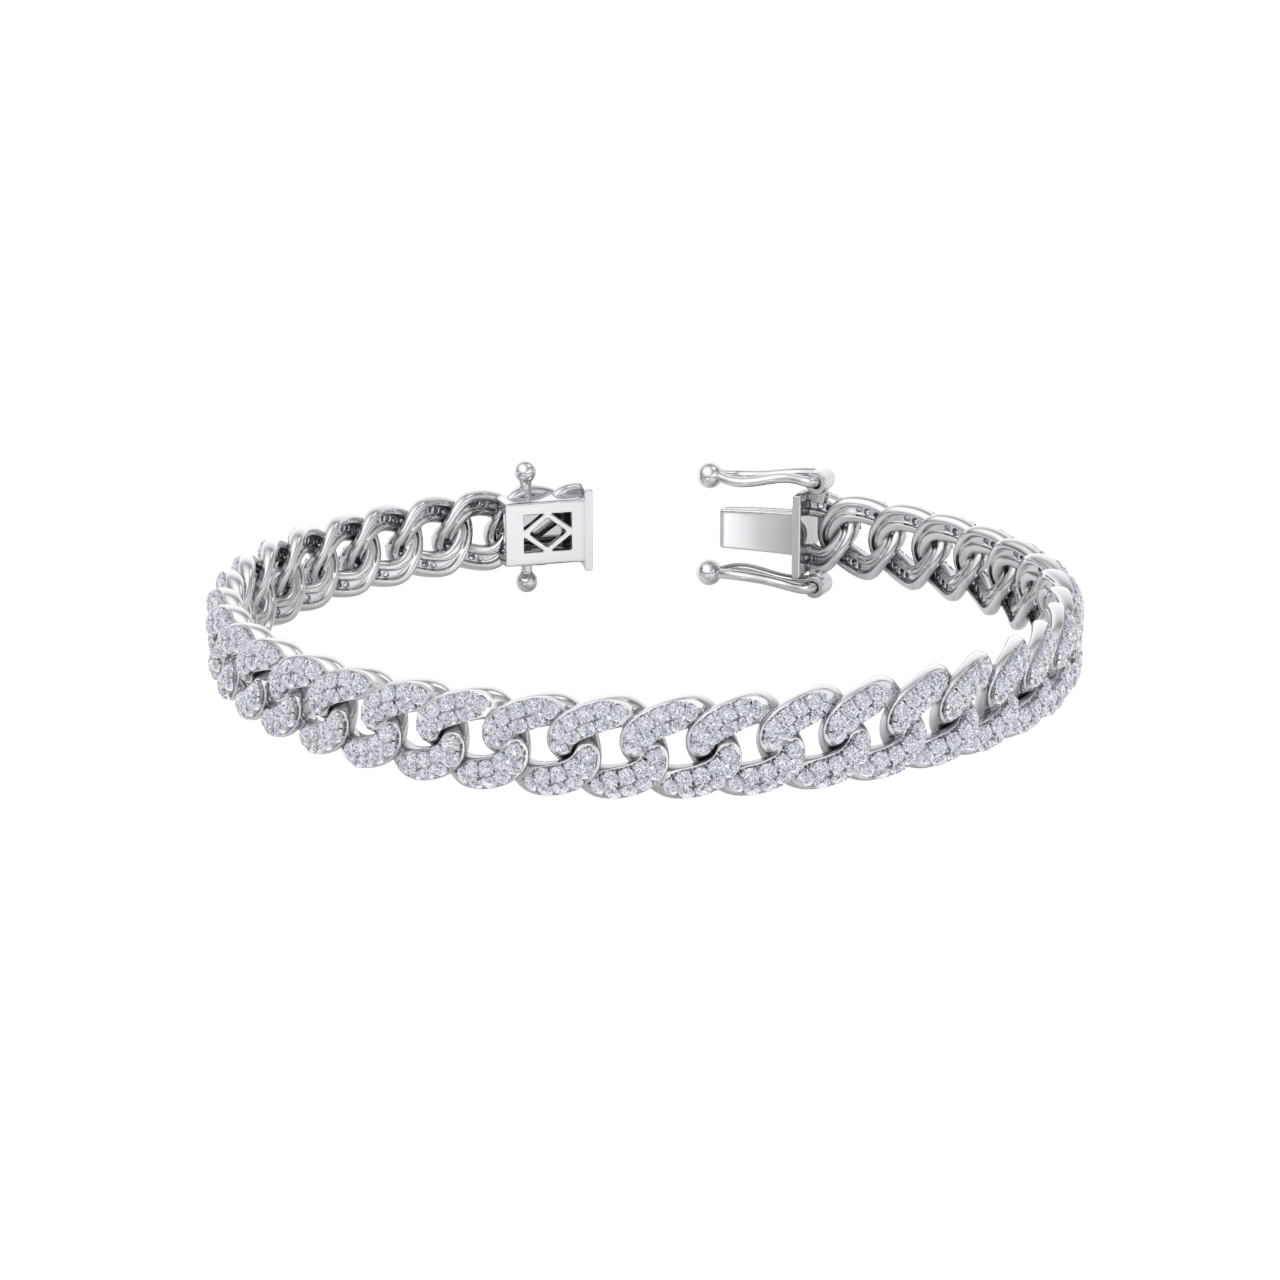 Chain diamond bracelet in white gold with white diamonds of 3.95 ct in weight